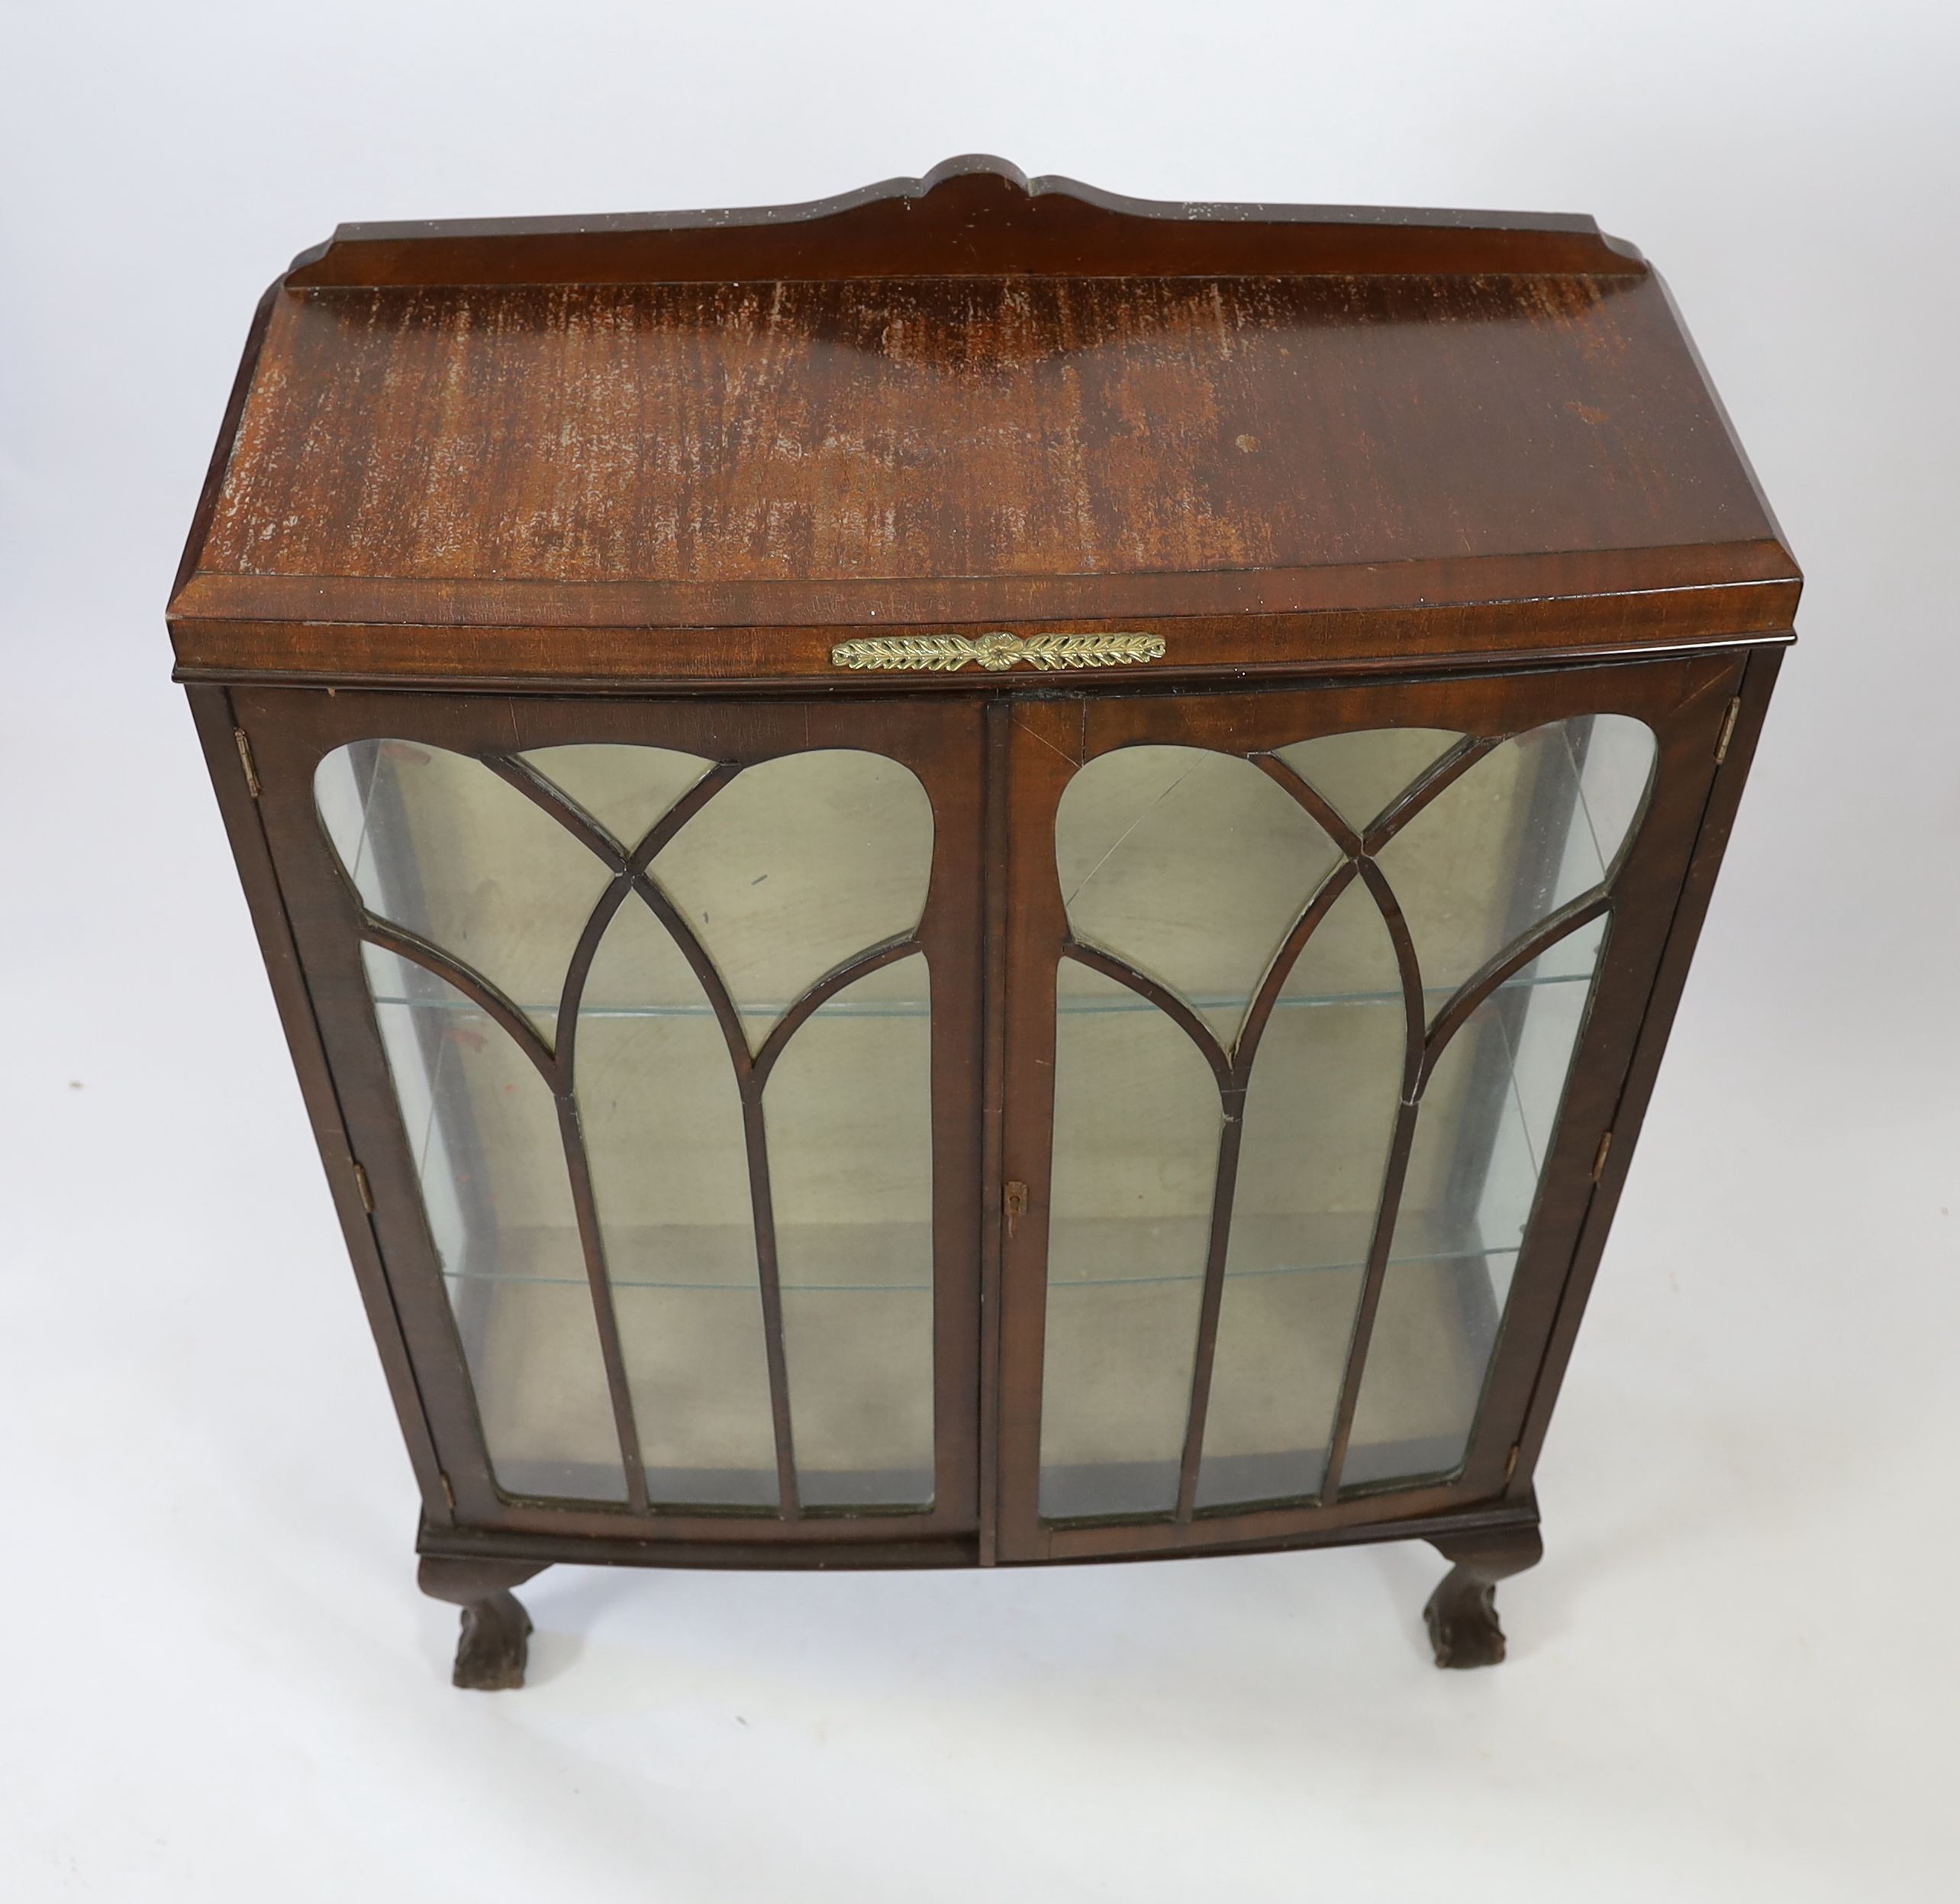 A 1920's mahogany bowfront display cabinet, width 88cm depth 32cm height 124cm